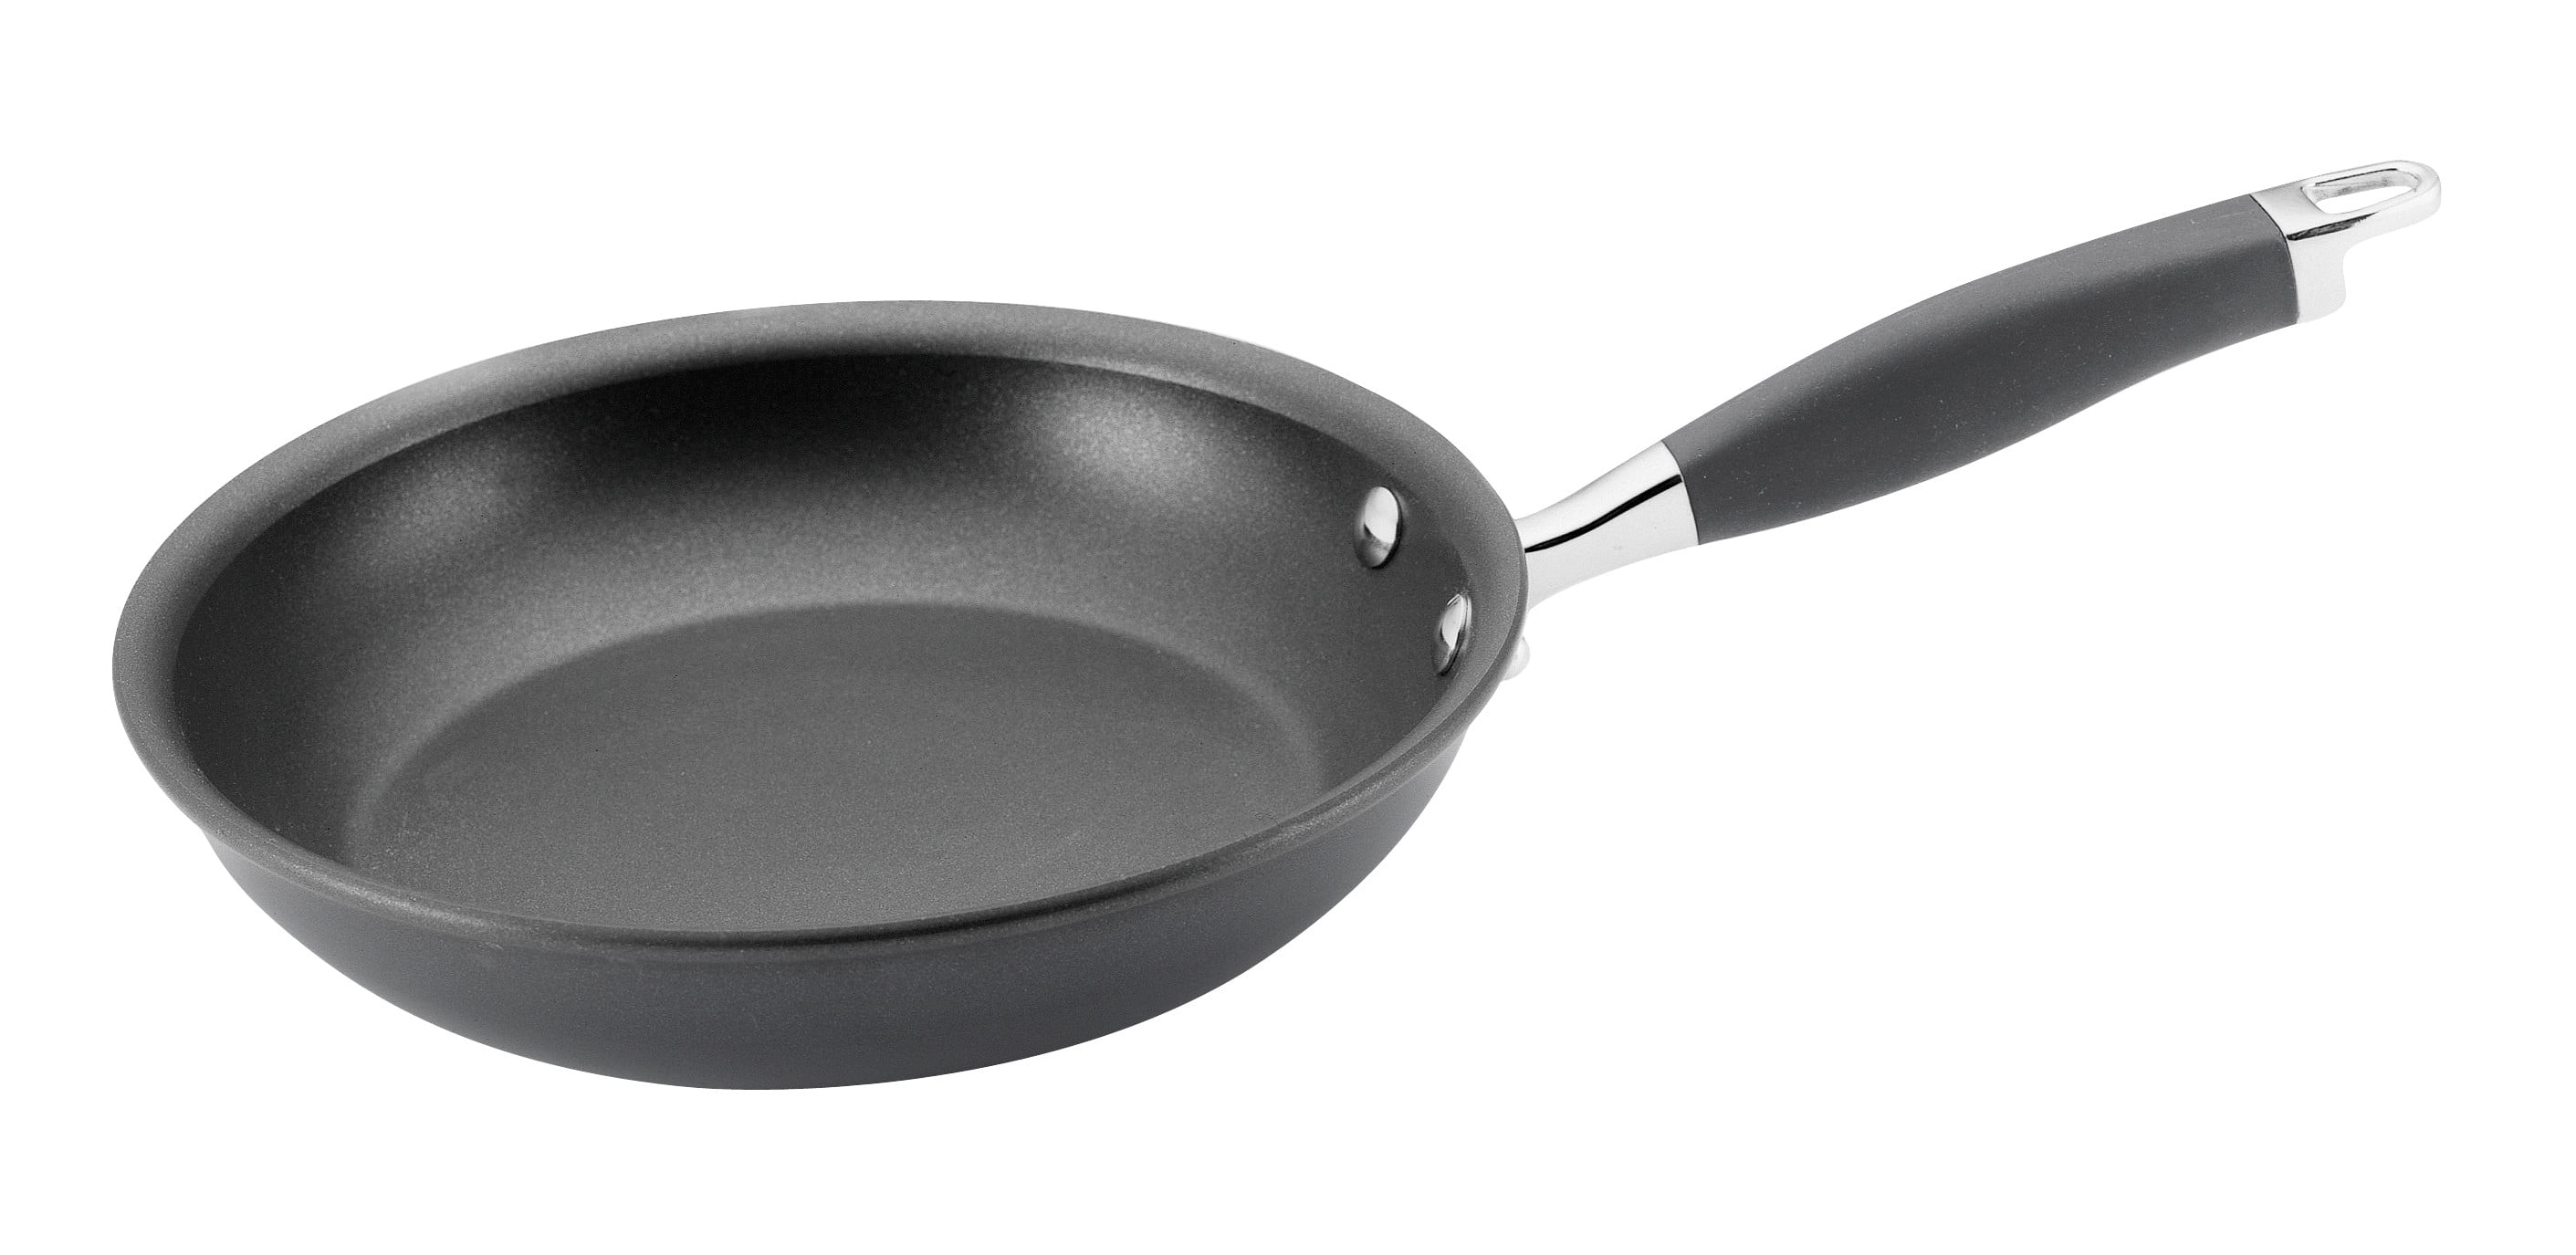 Anolon Advanced Hard Anodized Nonstick Frying Pan/ Fry Saute All Purpose  Pan with Lid - 12 Inch, Gray